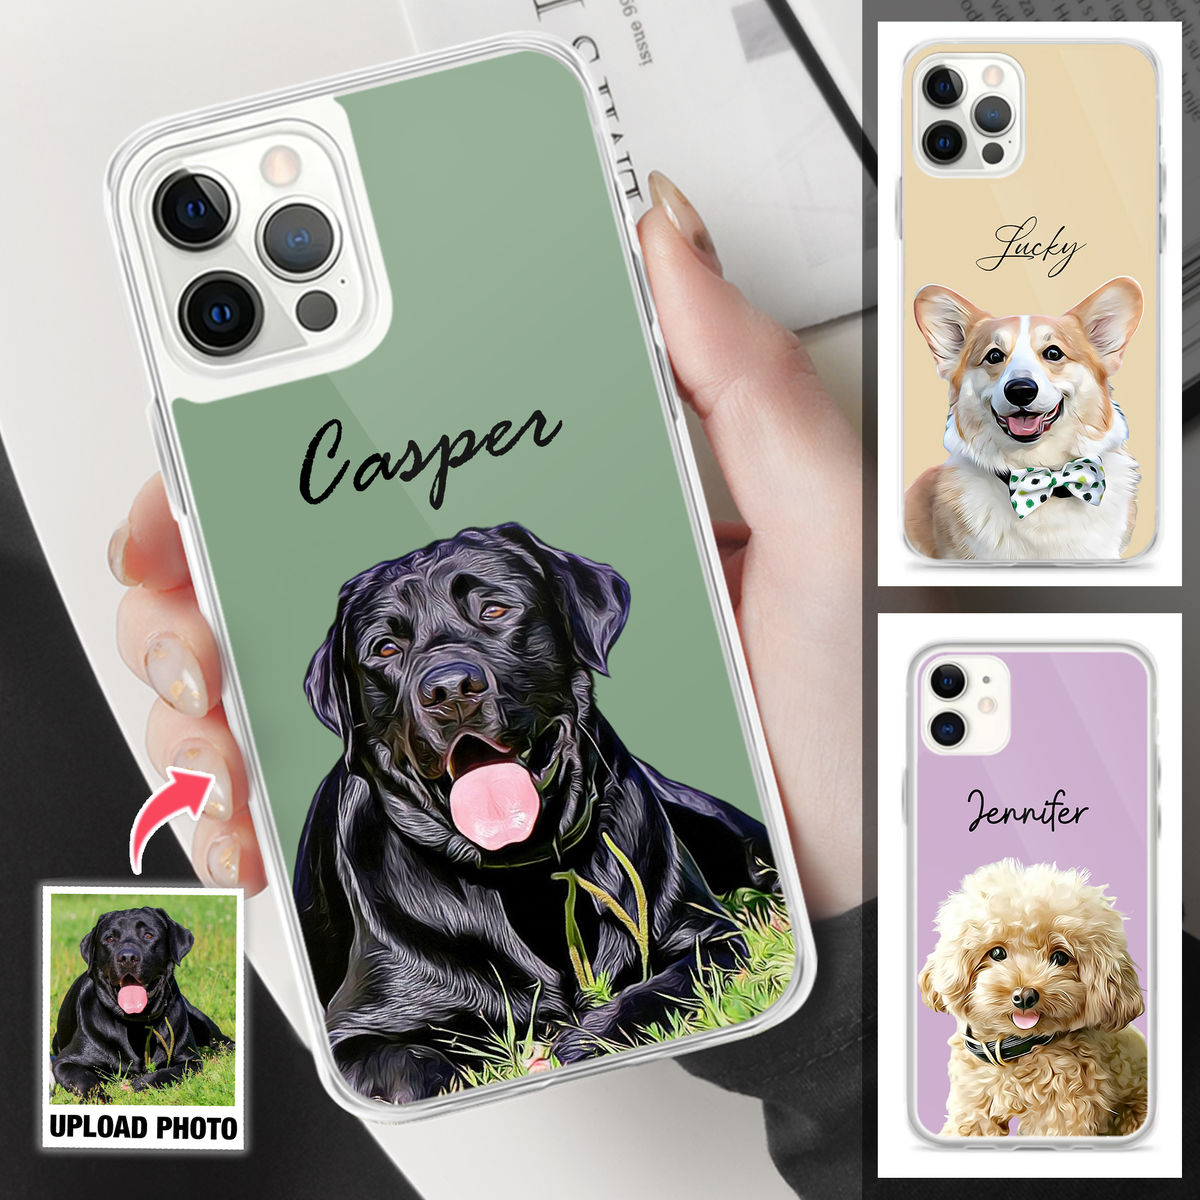 iPhone Case - Pet Lover Gifts - Dog Portrait - Digital Oil Painting - Christmas Gifts, Custom Photo Gifts